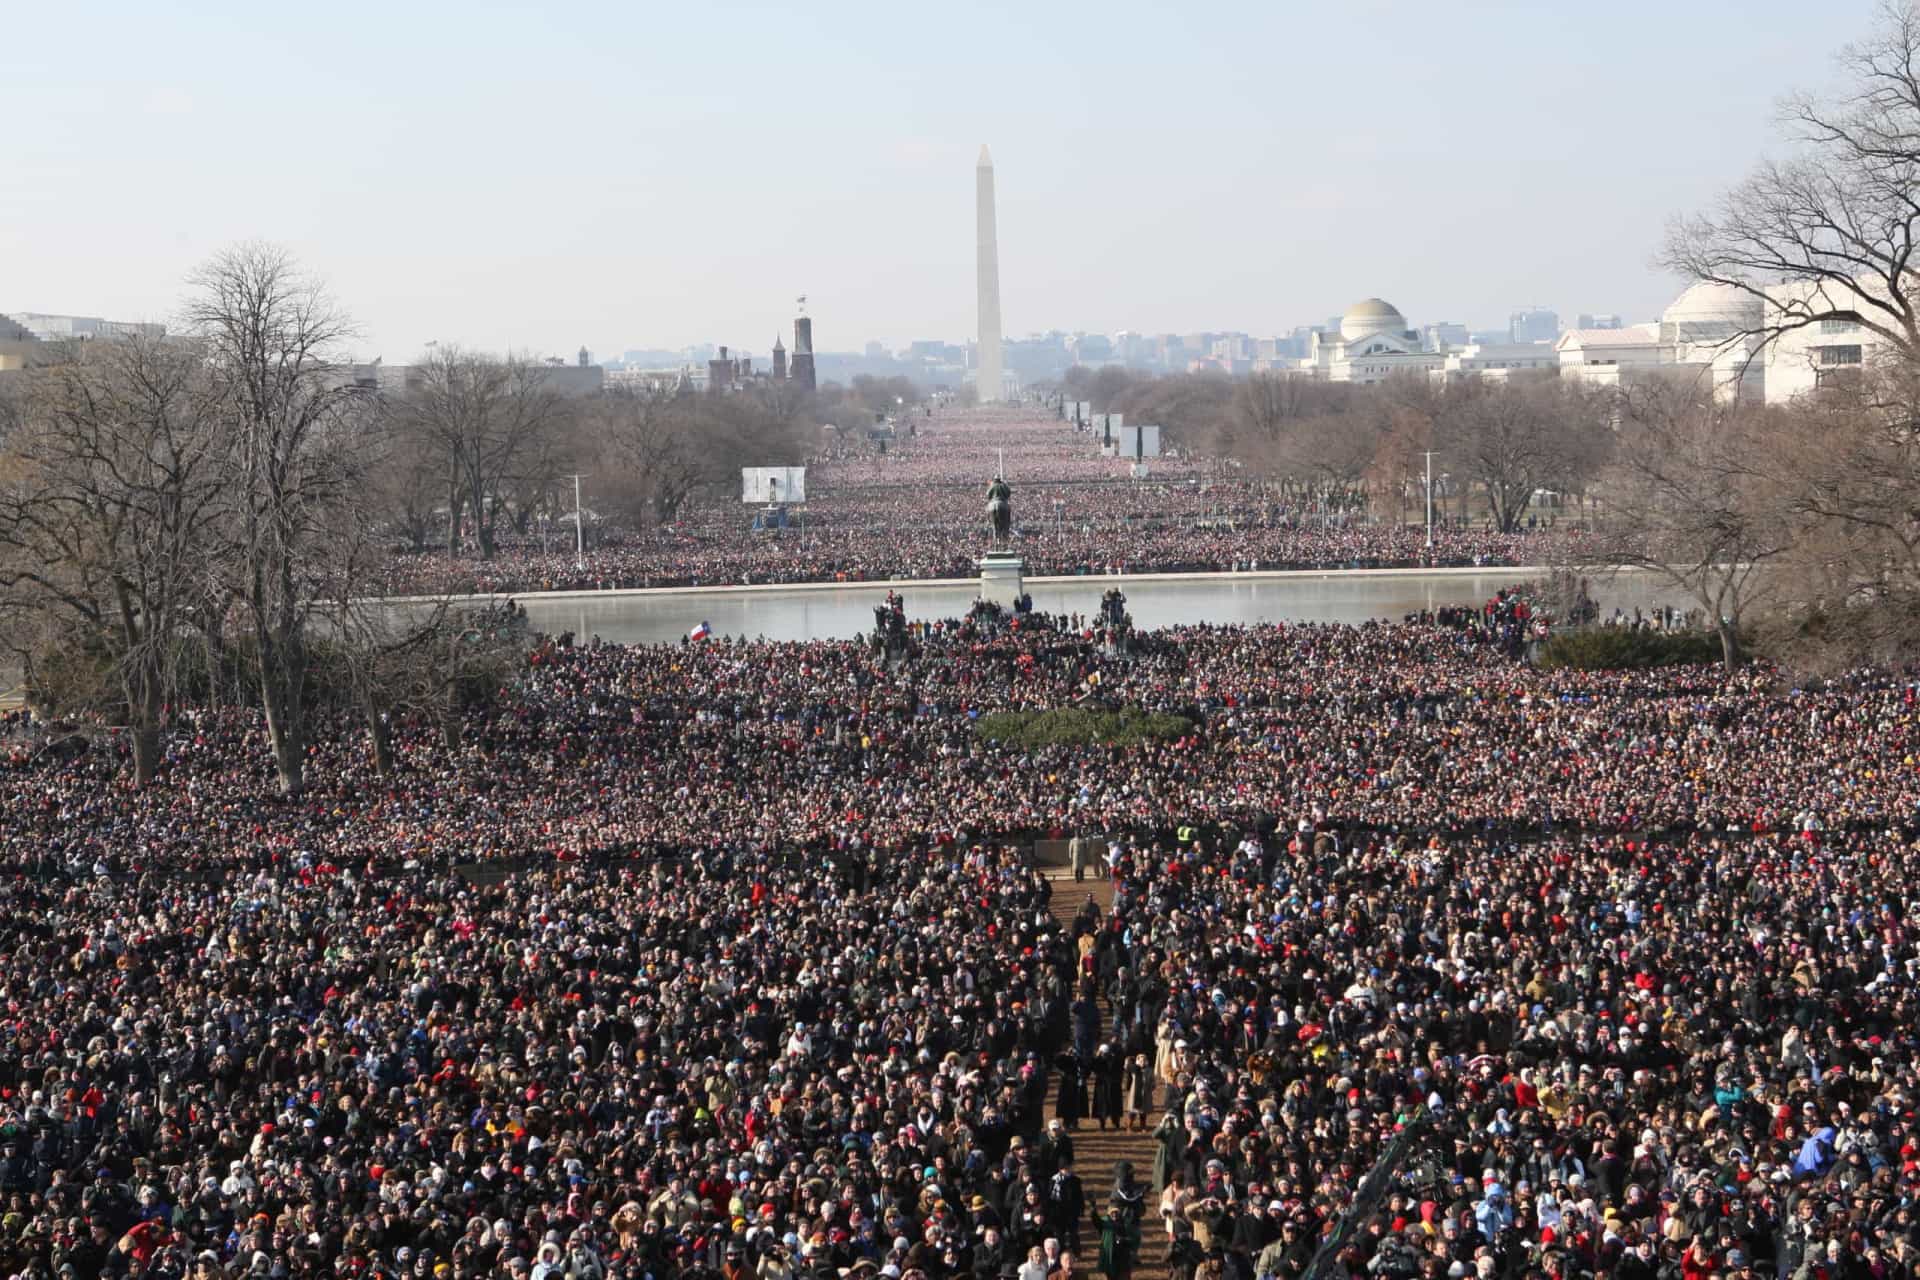 <p>Washington, D.C. receives its fair share of tourists every year, but on January of 2009, Barack Obama was sworn in as President of the United States. The inauguration attracted an estimated 1.8 million people to the area. </p>